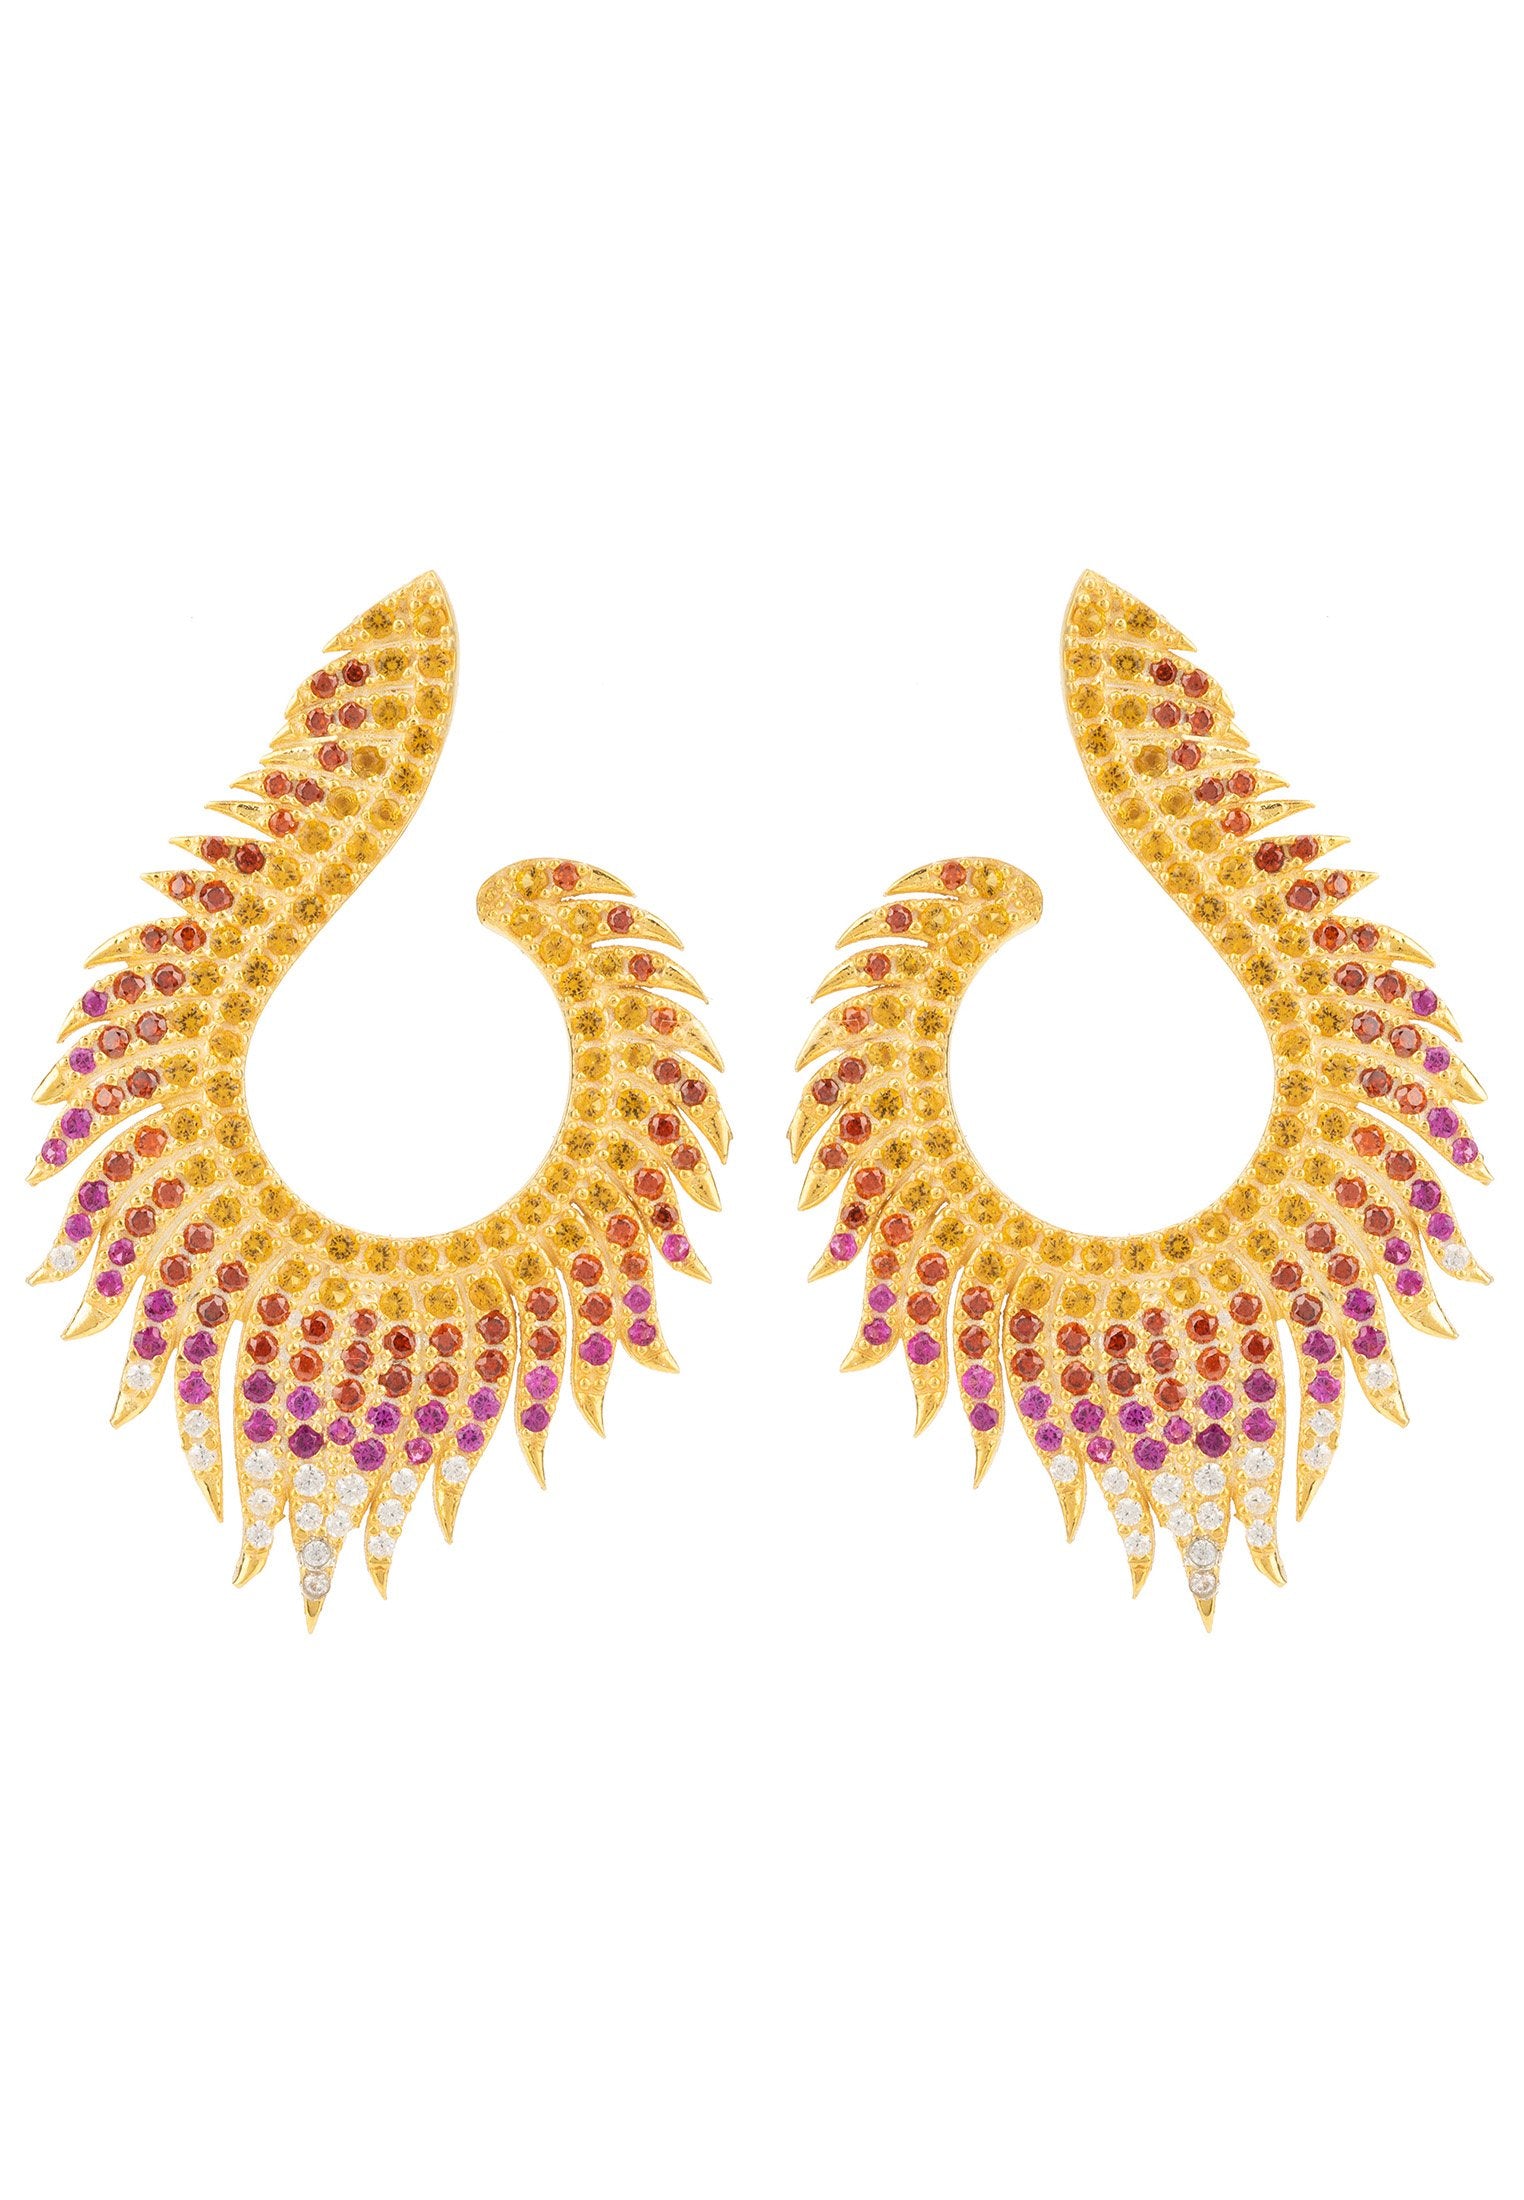 Golden Flame Earrings with Zirconia Accents - Handcrafted Sterling Silver Jewelry for Weddings and Evenings - Jewelry & Watches - Bijou Her -  -  - 